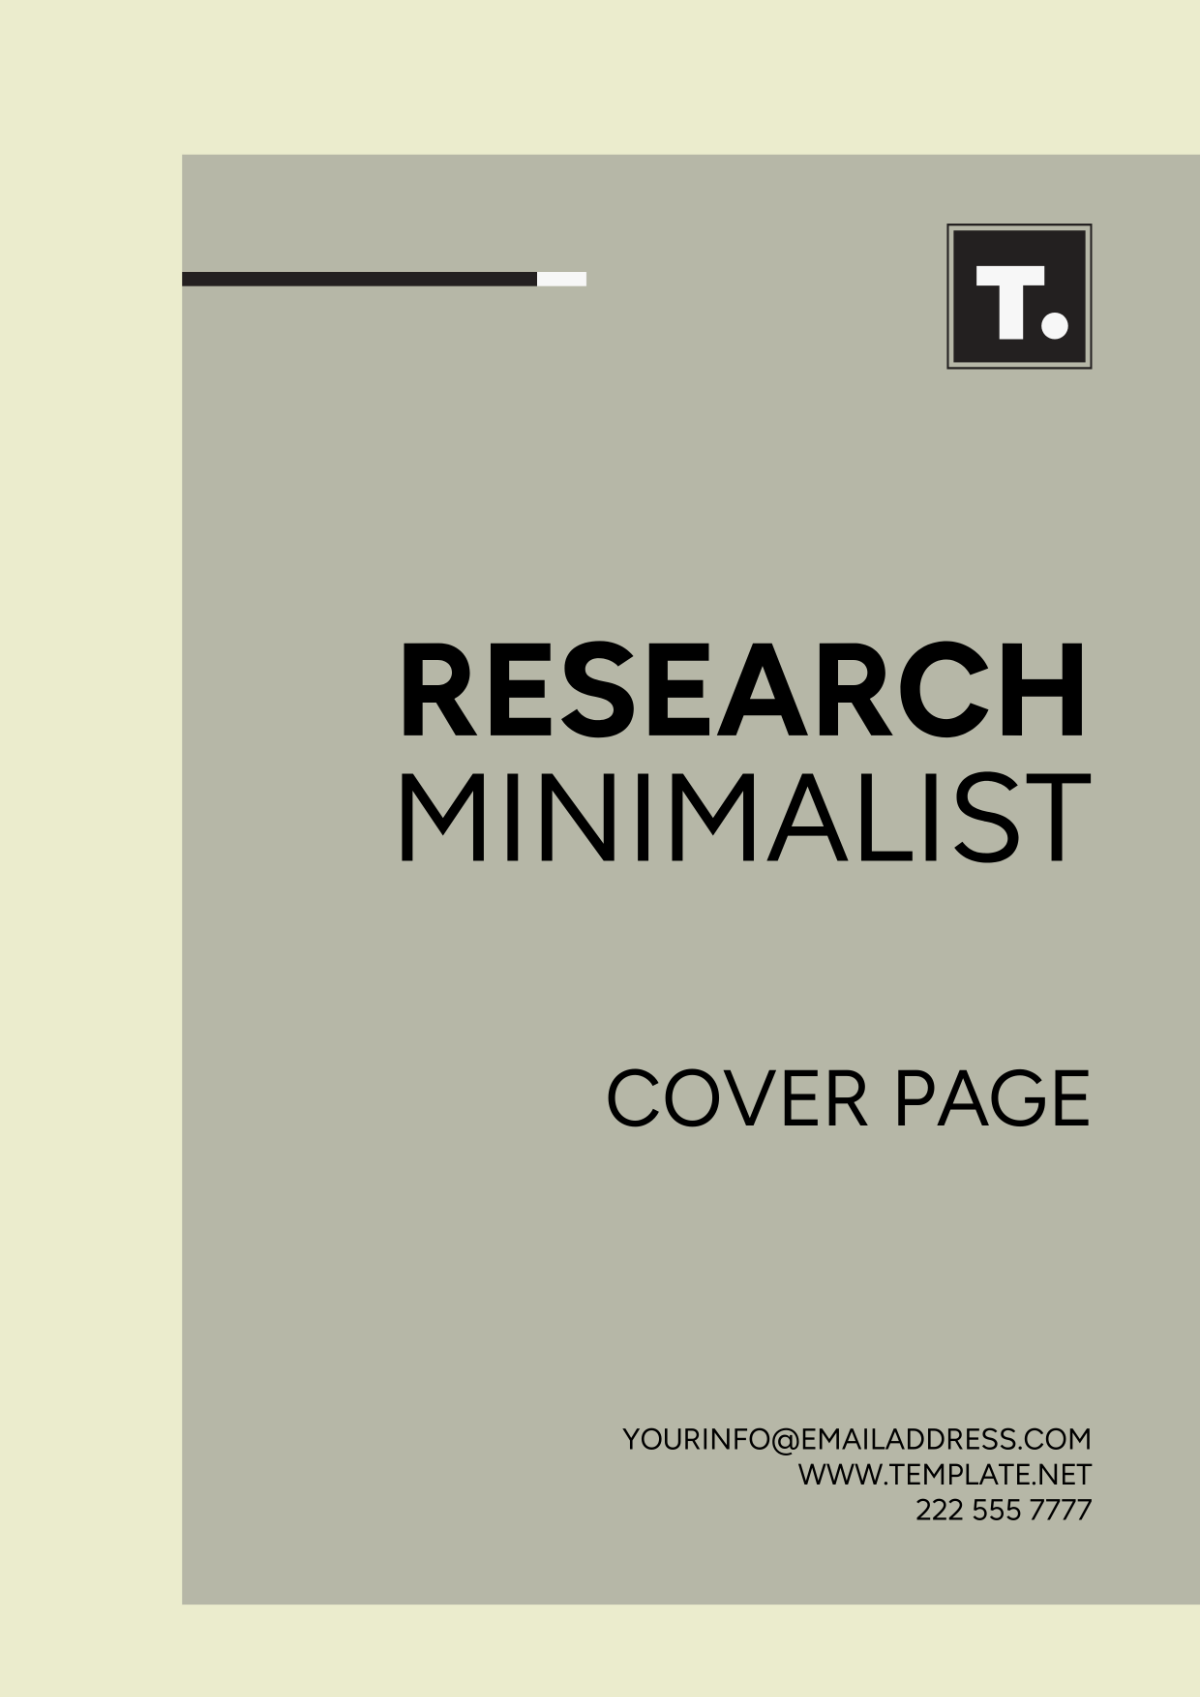 Free Research Minimalist Cover Page Template